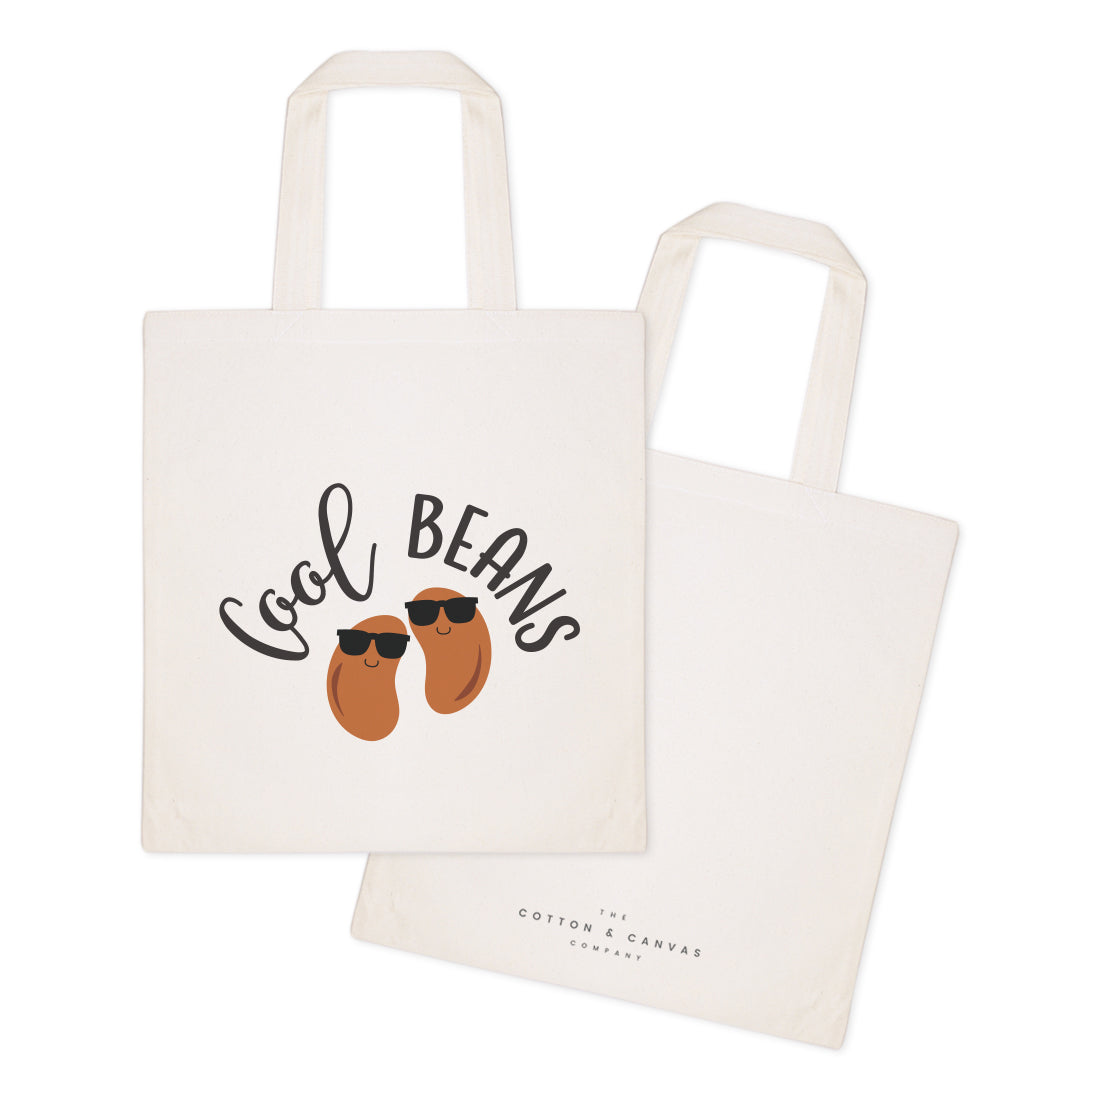 Cool Beans Cotton Canvas Tote Bag by The Cotton & Canvas Co.